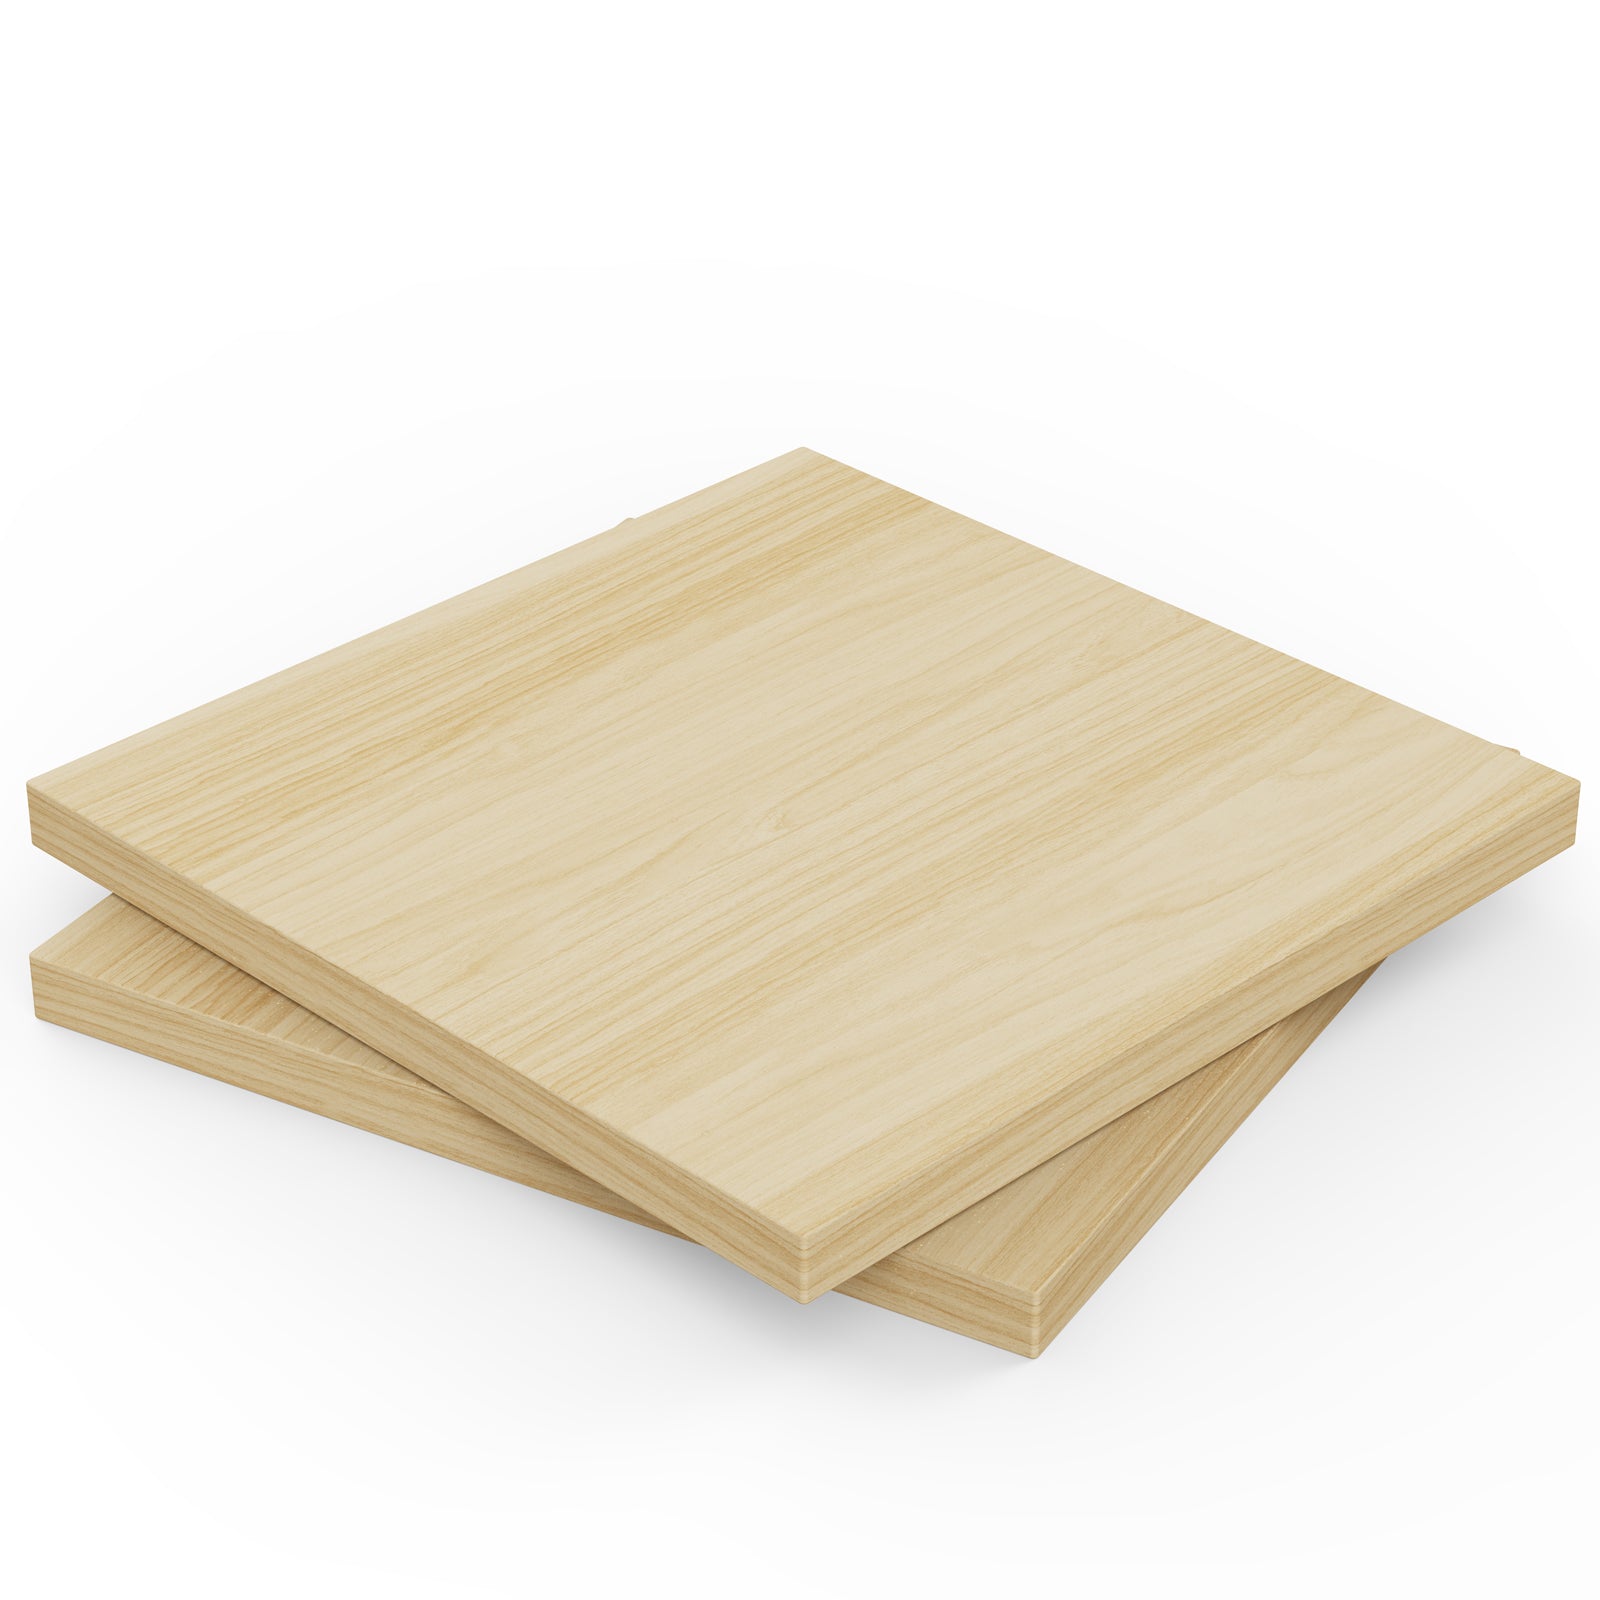 Anti Curl Thin Mill Board Paper , A4 Cardboard Sheets One Side Coated